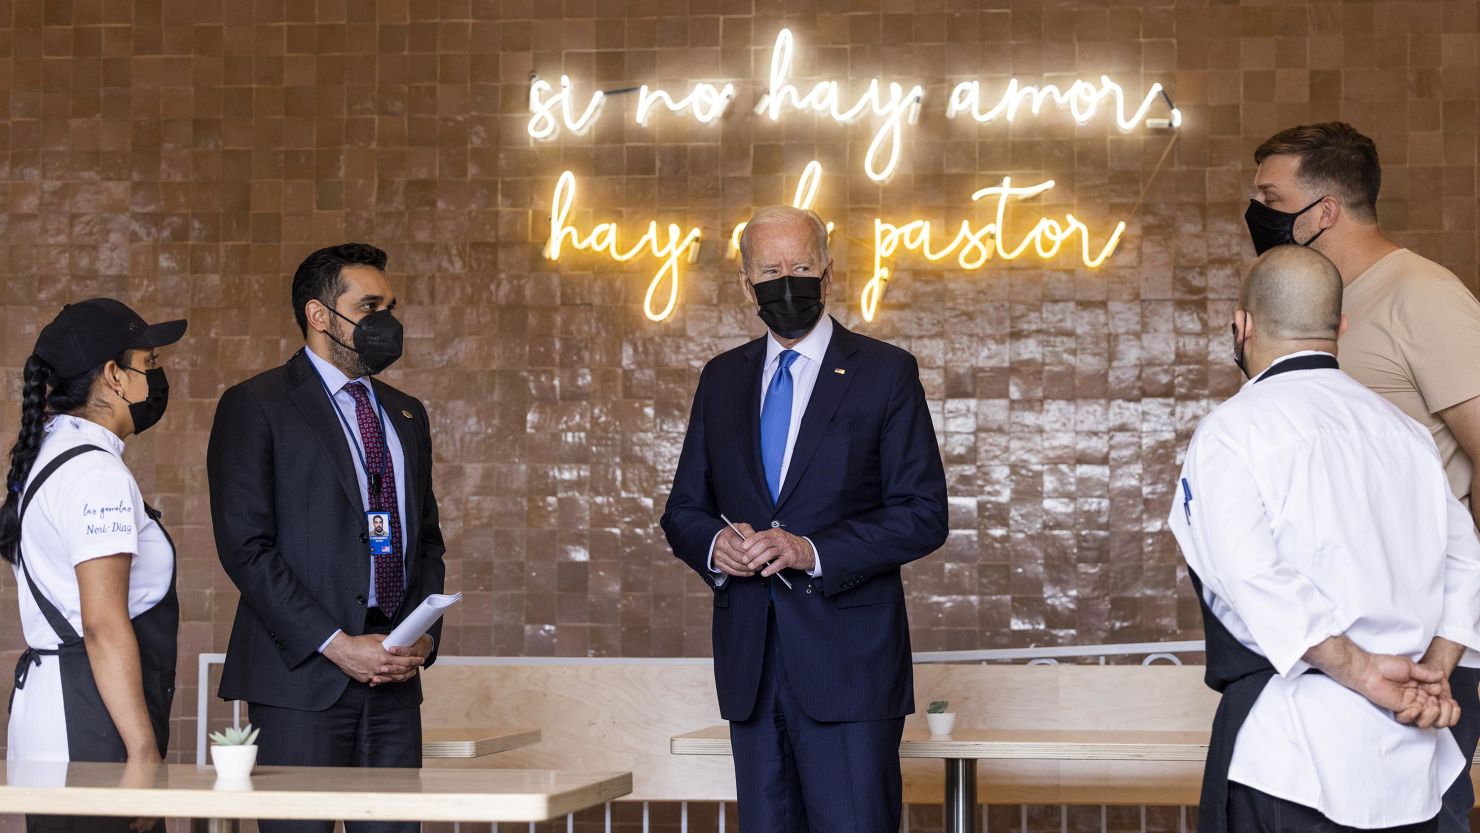 U.S. President Joe Biden, center, wears a protective mask while speaking to employees at Las Gemelas restaurant in Washington, D.C., U.S., on Wednesday, May 5, 2021. Biden visited the restaurant owned in part by Mexican immigrants to highlight $28.6 billion in federal aid for restaurants that struggled during the pandemic. 